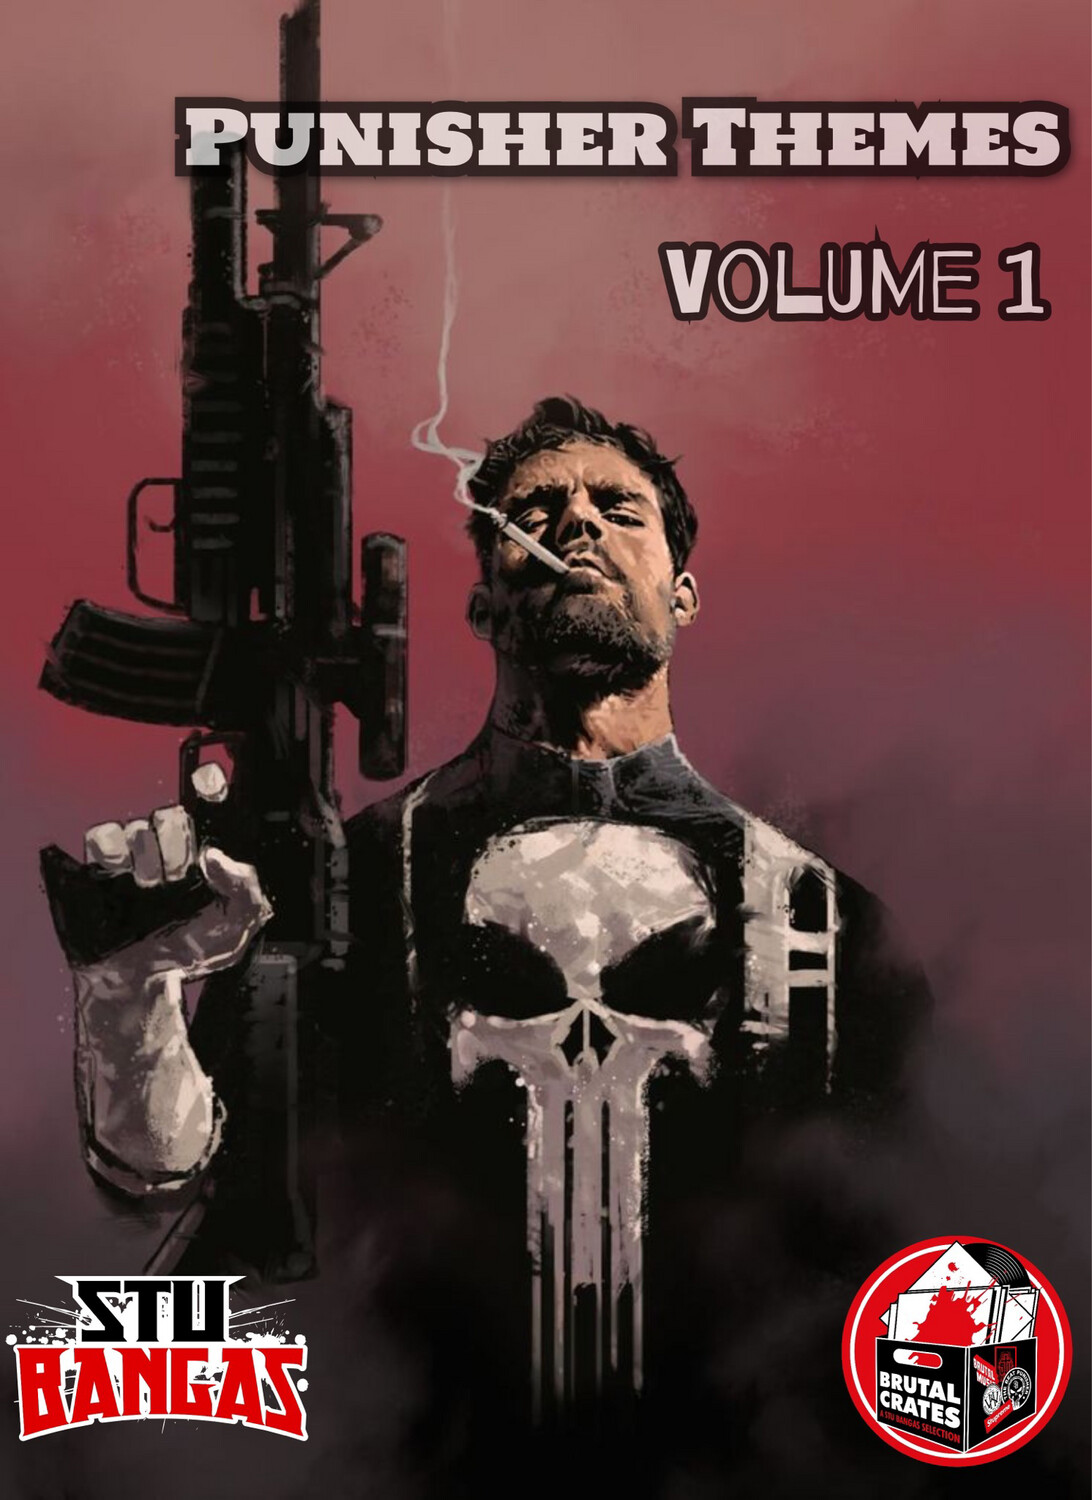 BRUTAL CRATES "PUNISHER THEME MUSIC VOL. 1" SAMPLE PACK (COMPOSITIONS AND STEMS)